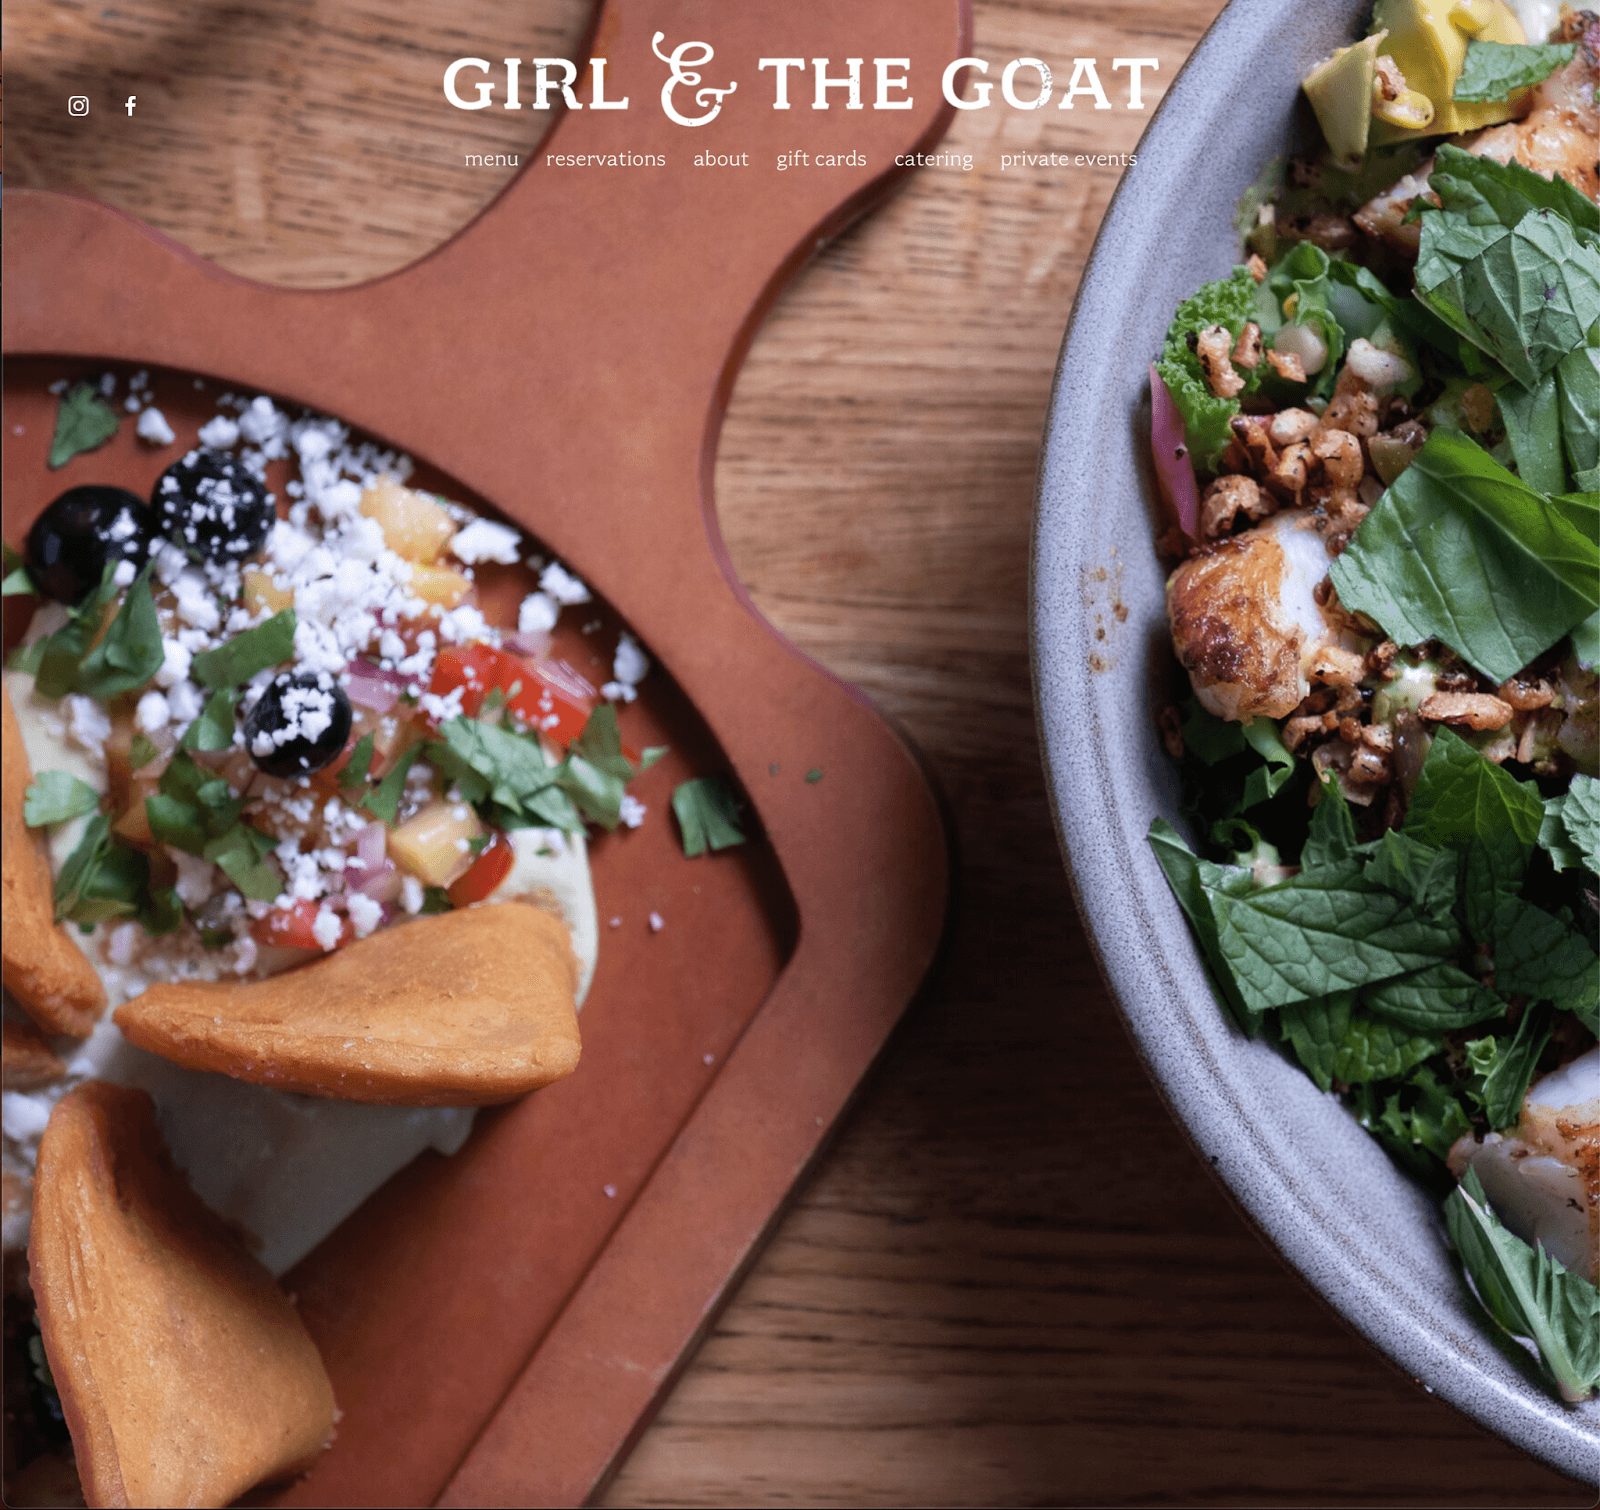 Girl and the Goat homepage featuring an artfully staged photo of a meal